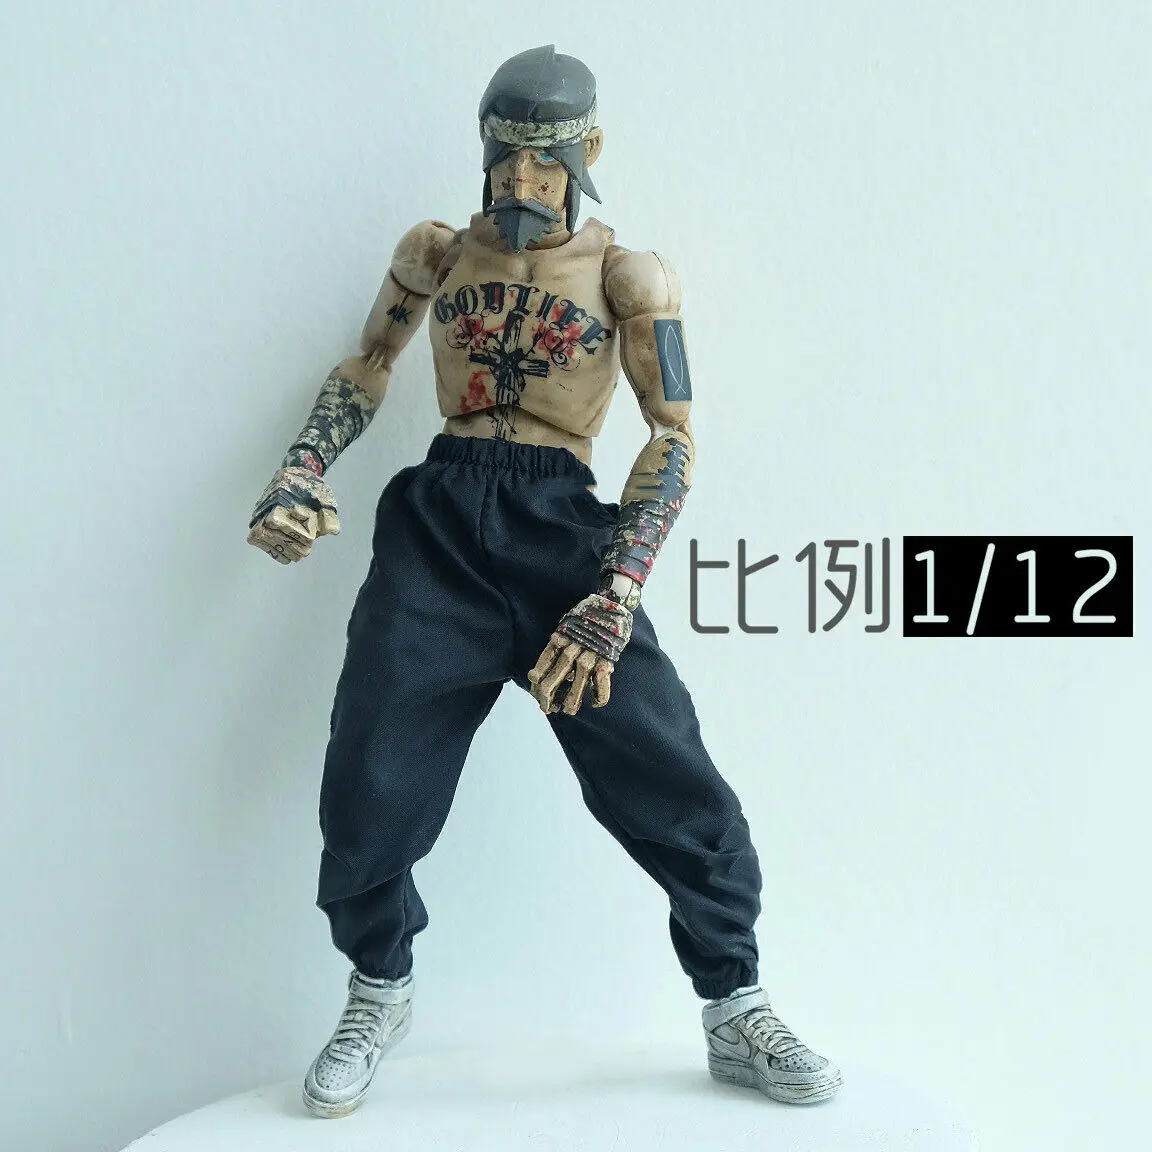 

【only pants】1/12 Scale Soldier Trendy Pants Model for 6" 3ATOYS DAM Body Action Figure Doll